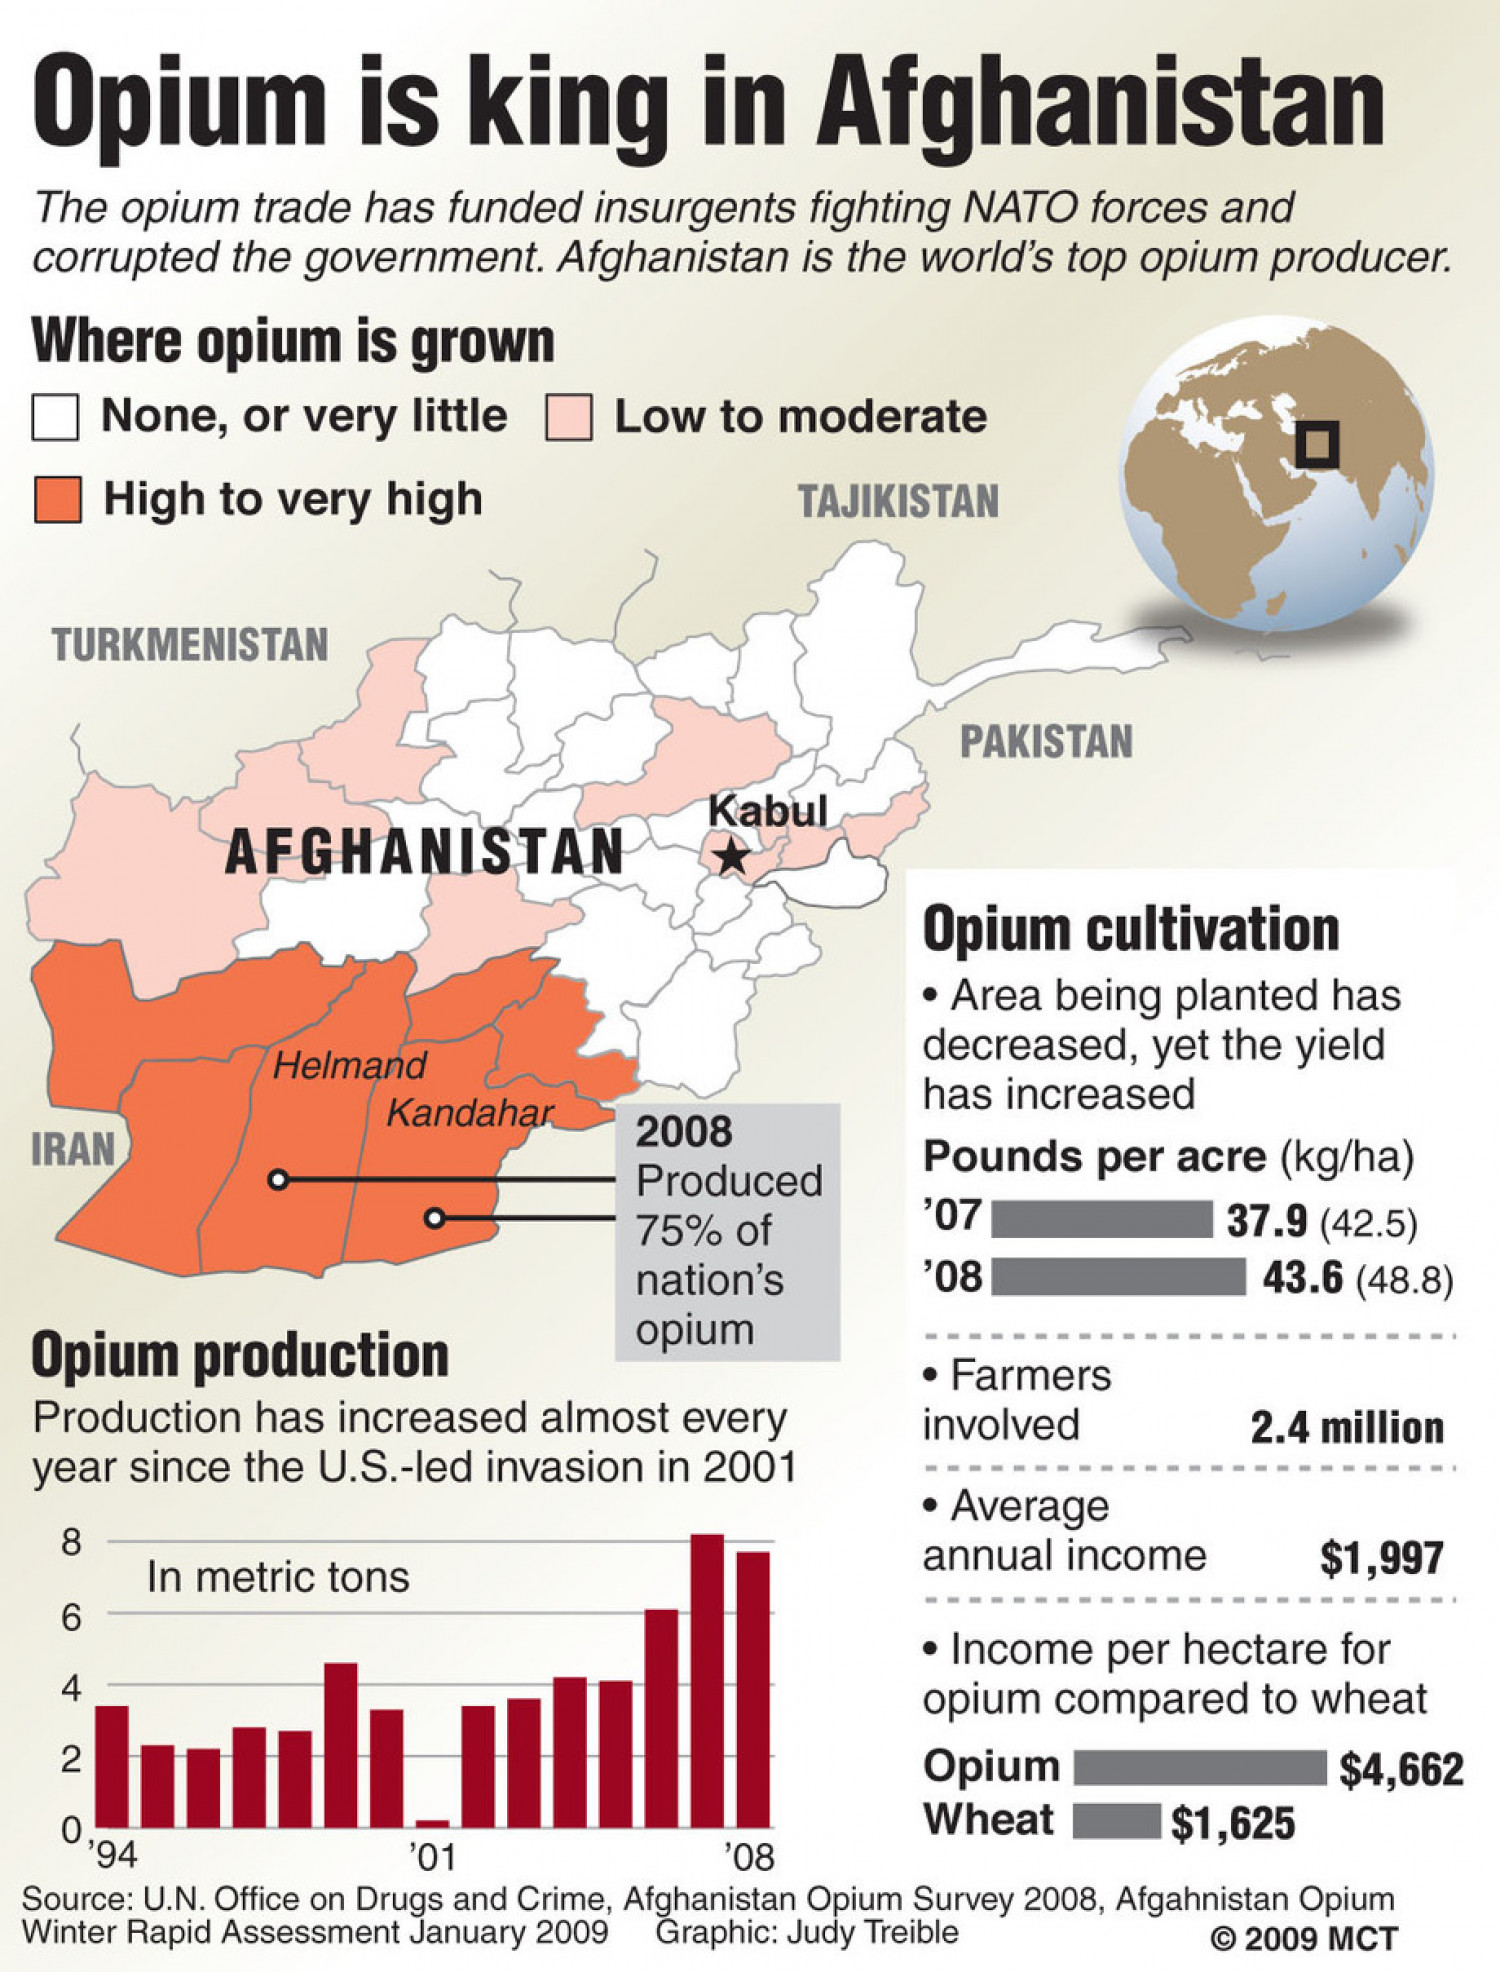 Opium is King in Afghanistan Infographic